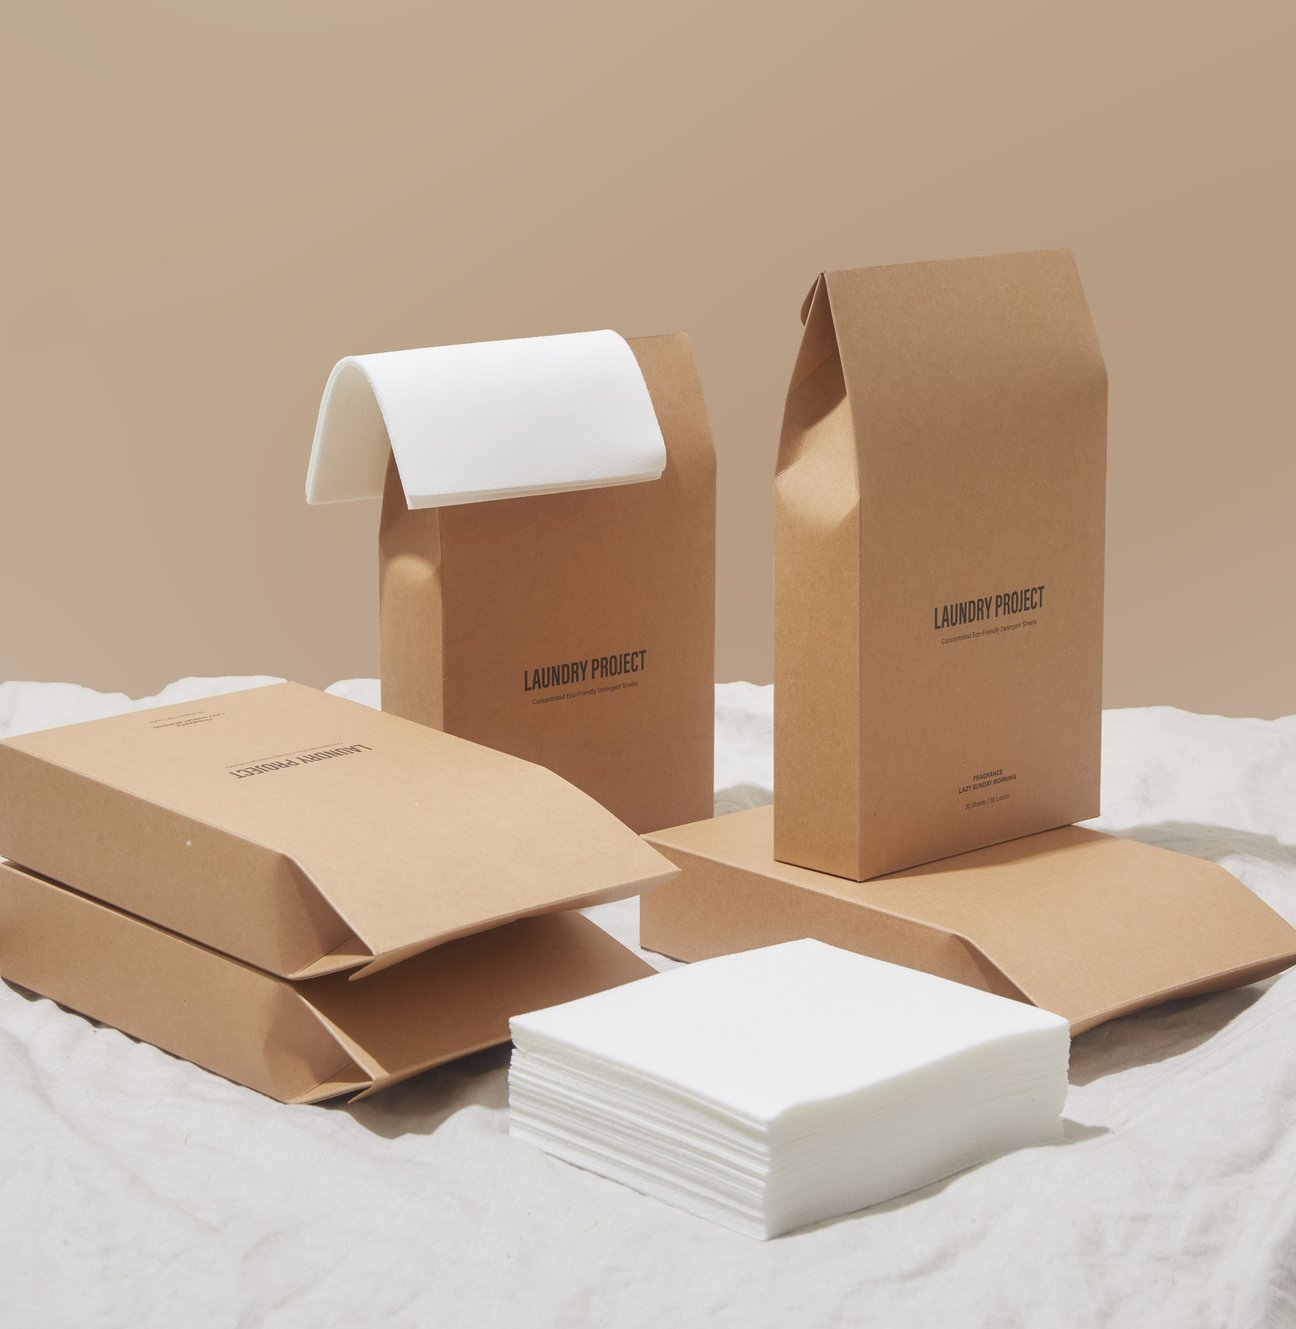 https://www.remodelista.com/wp-content/uploads/2021/05/wipe-that-eco-laundry-sheets.jpeg